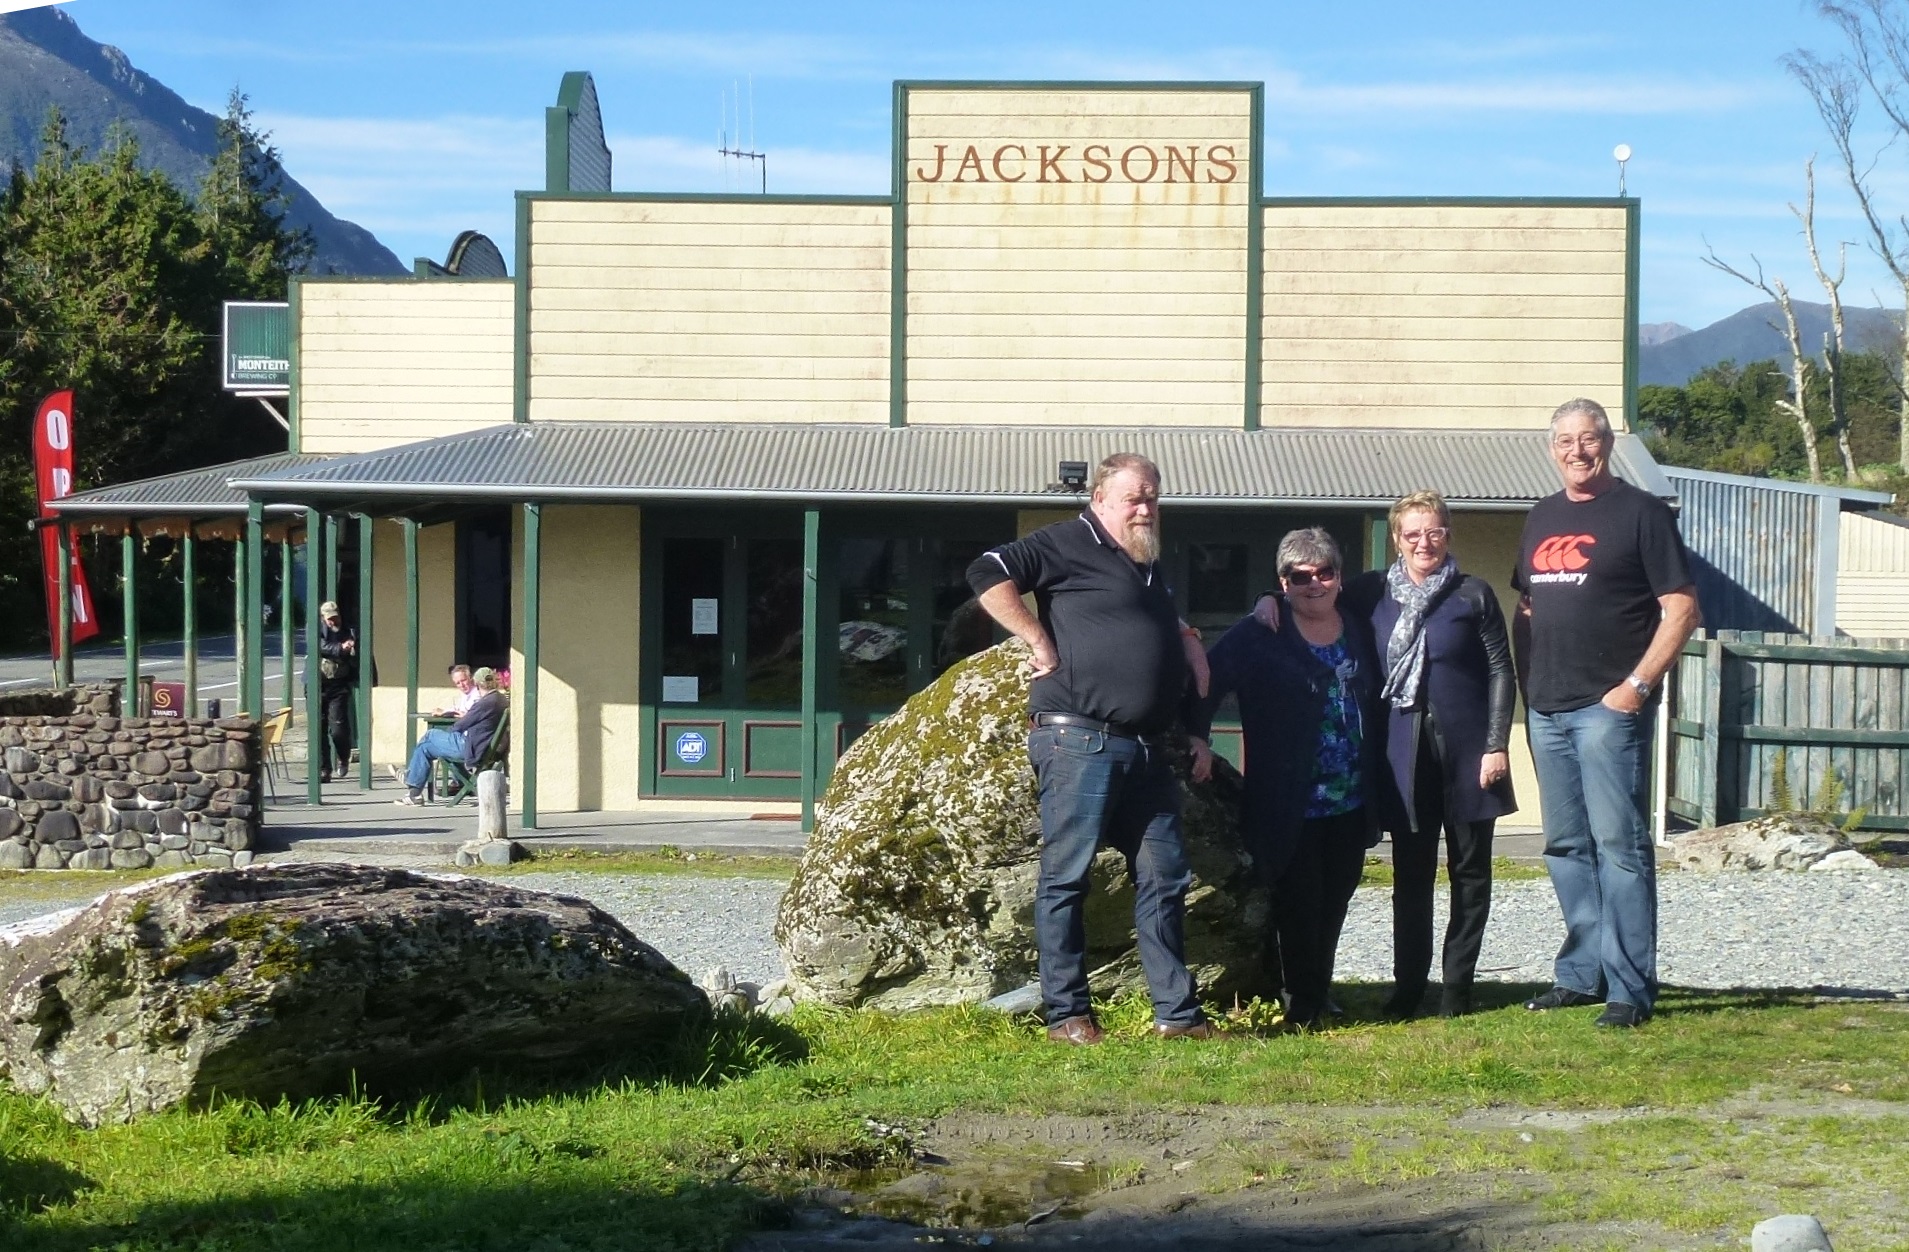 The Launch Team at Jacksons